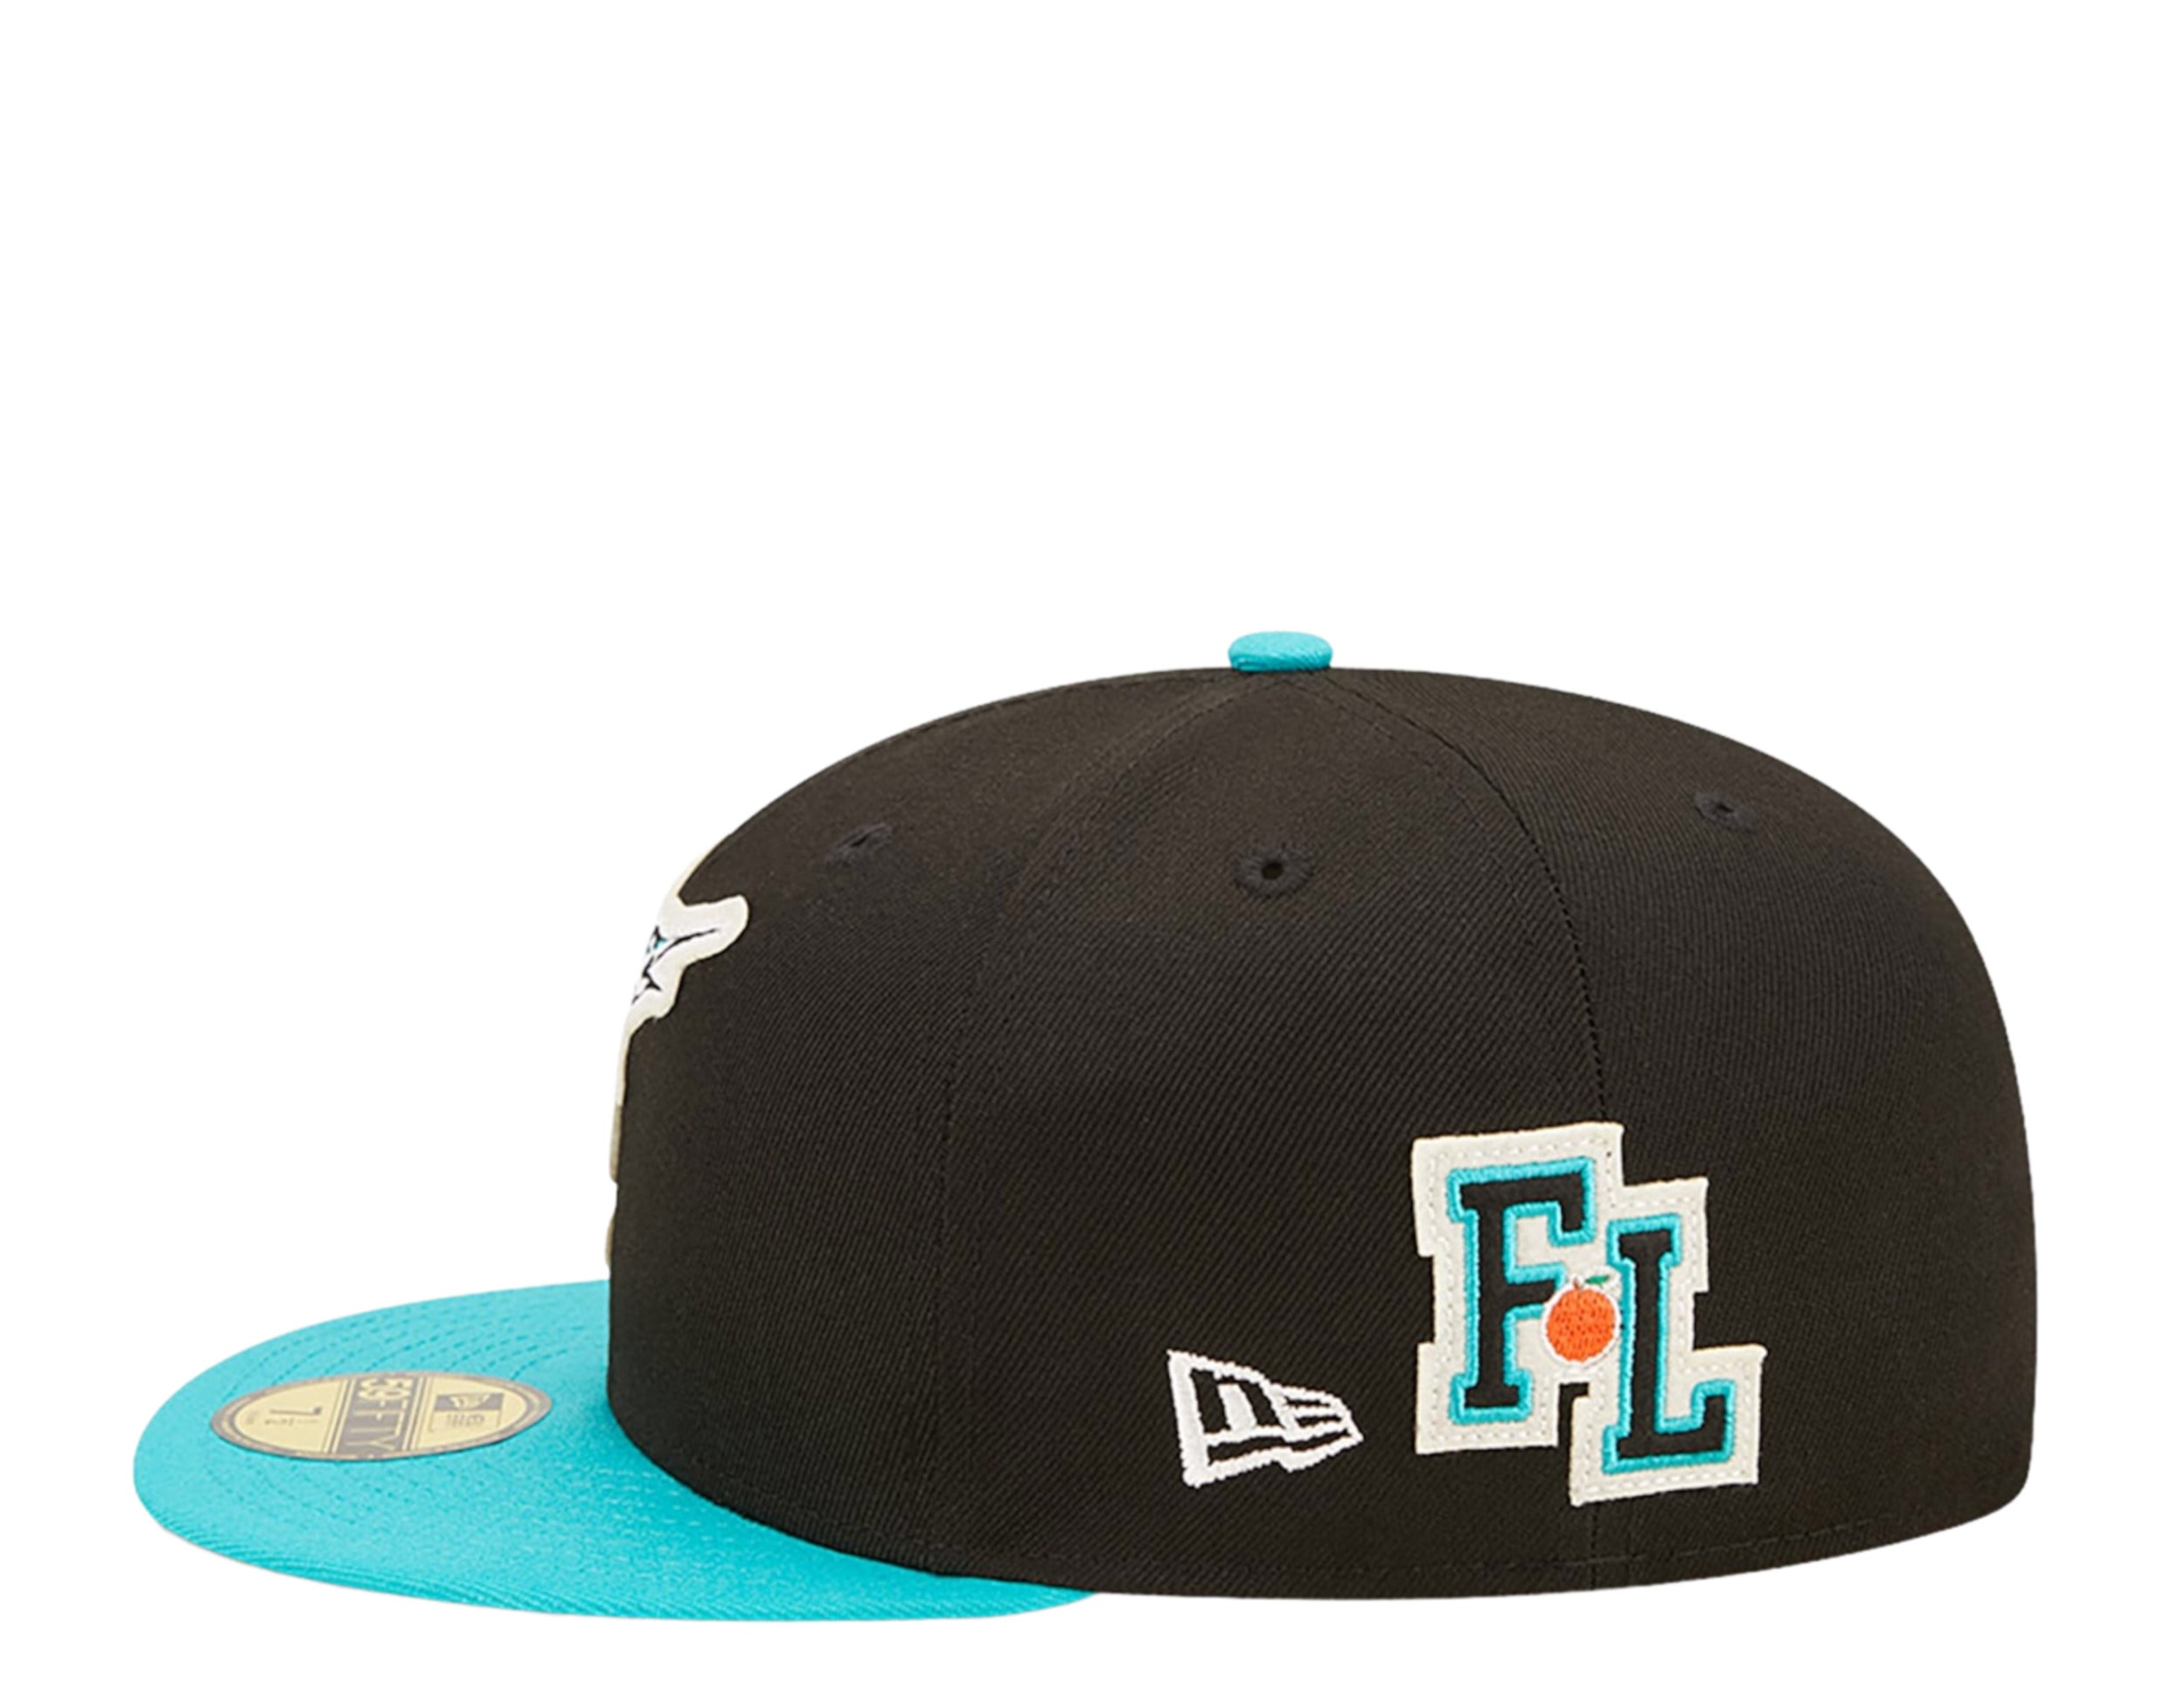 New Era 59Fifty Florida Marlins Fitted Hat Dark Green White